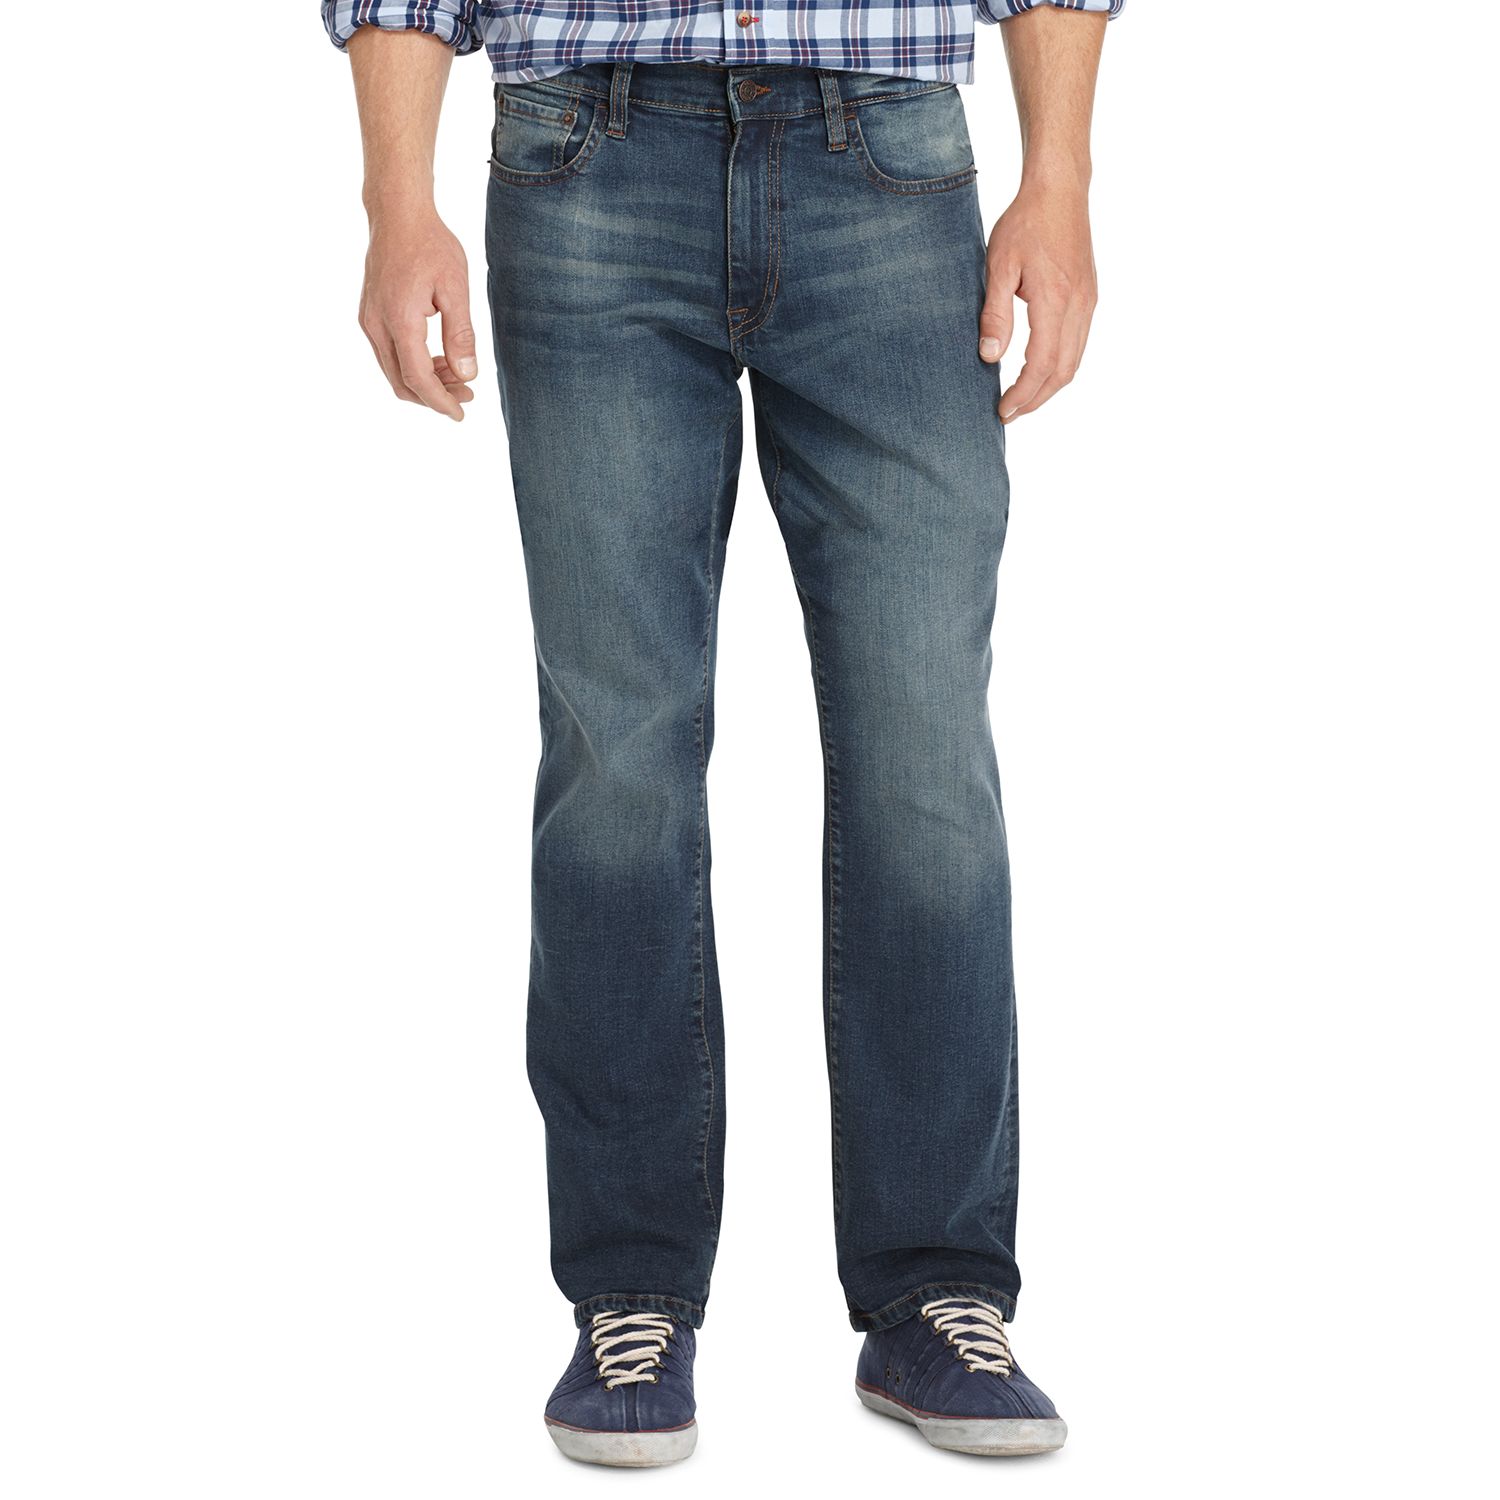 izod men's big & tall comfort stretch relaxed fit jean